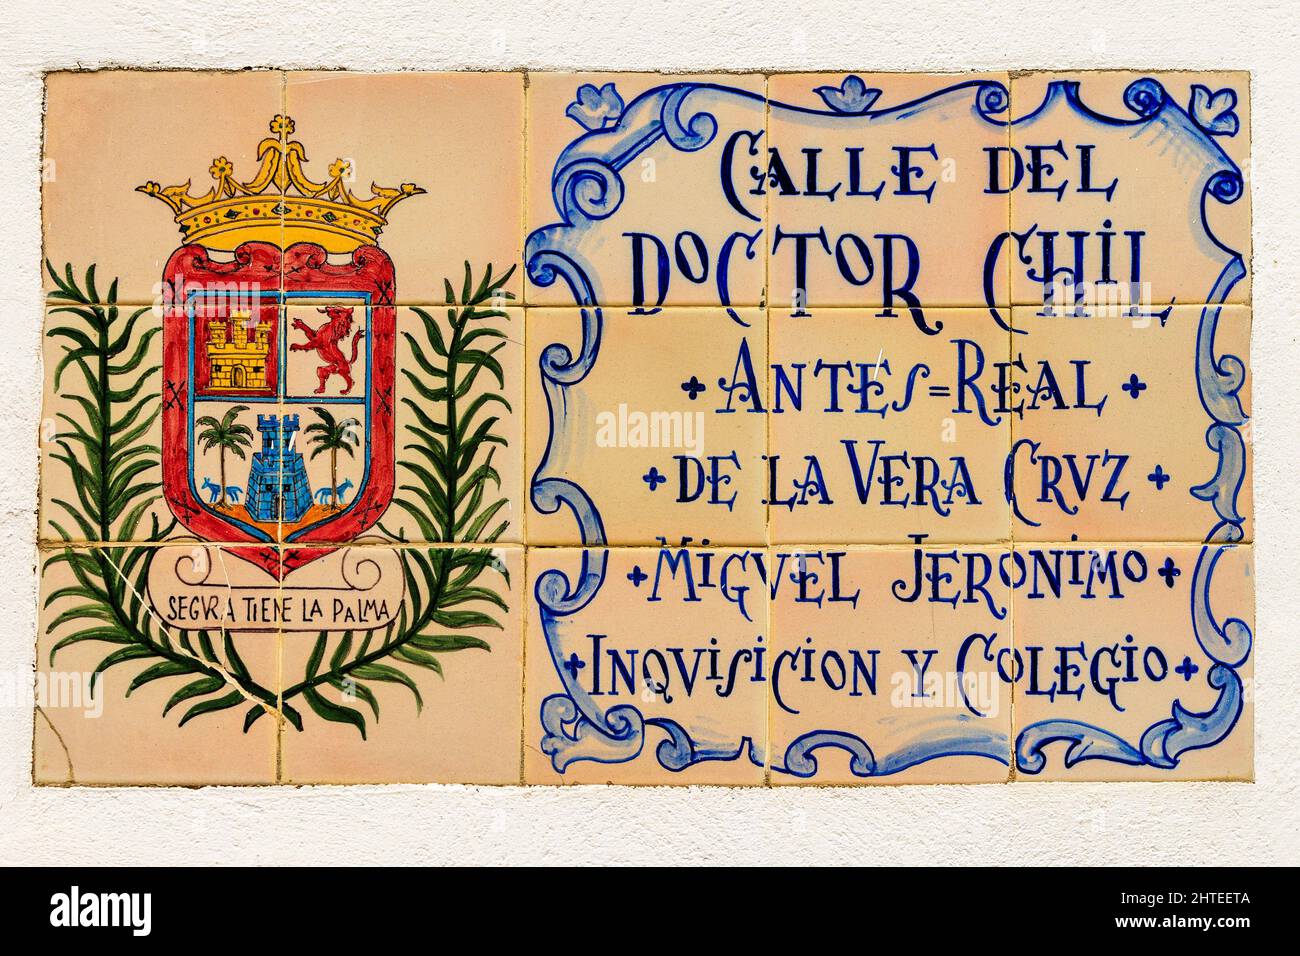 coloured tile decorative street sign for calle del doctor chil in vegueta district las palmas Stock Photo